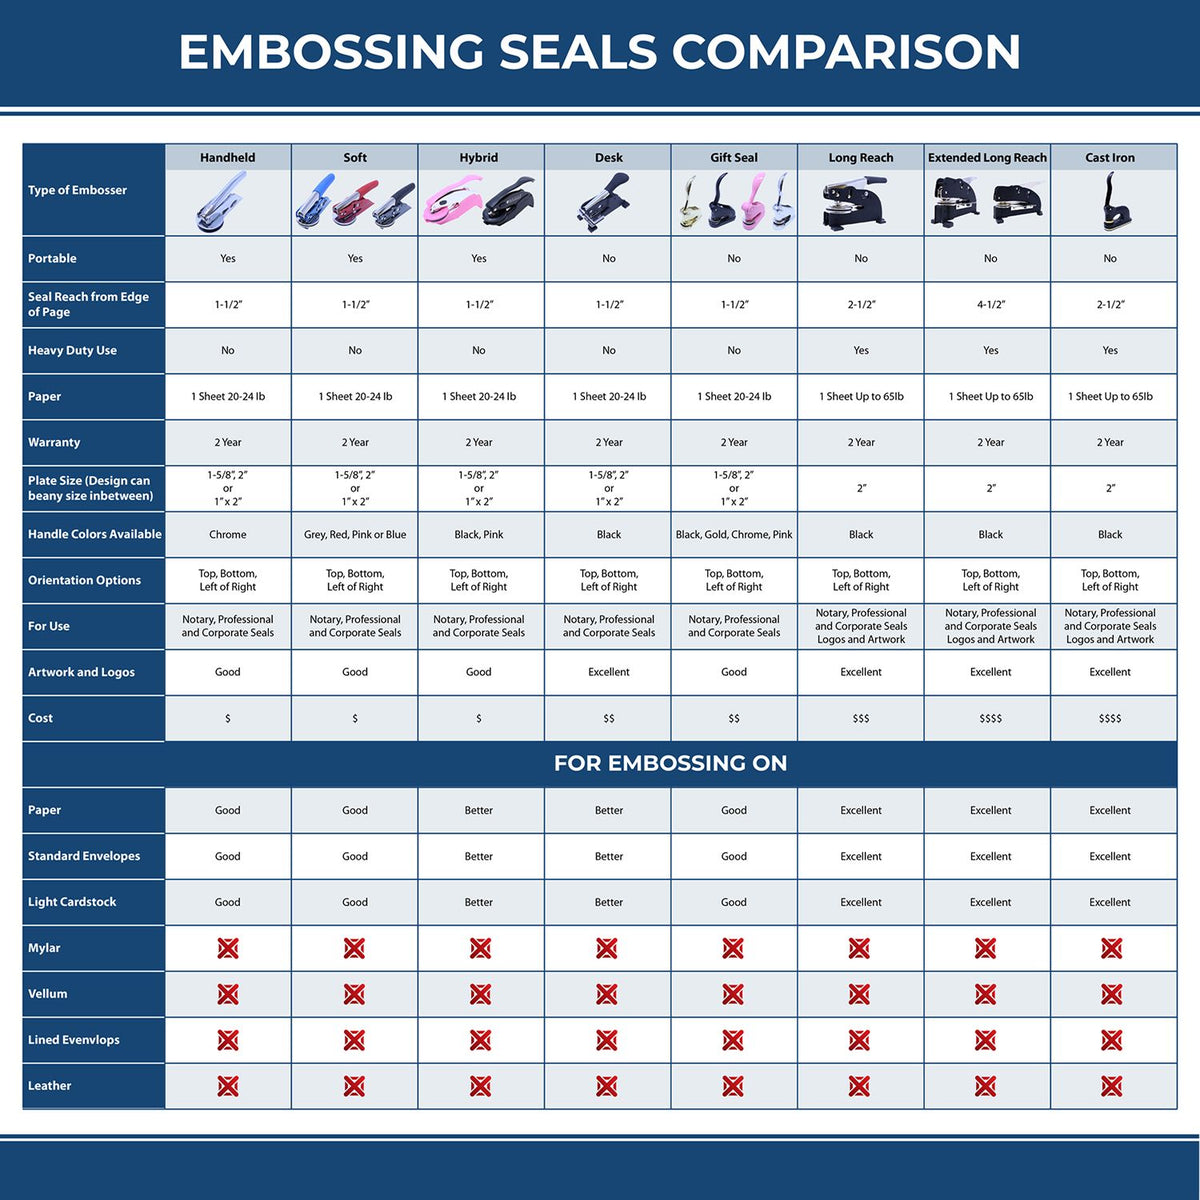 A comparison chart for the different types of mount models available for the Hybrid California Engineer Seal